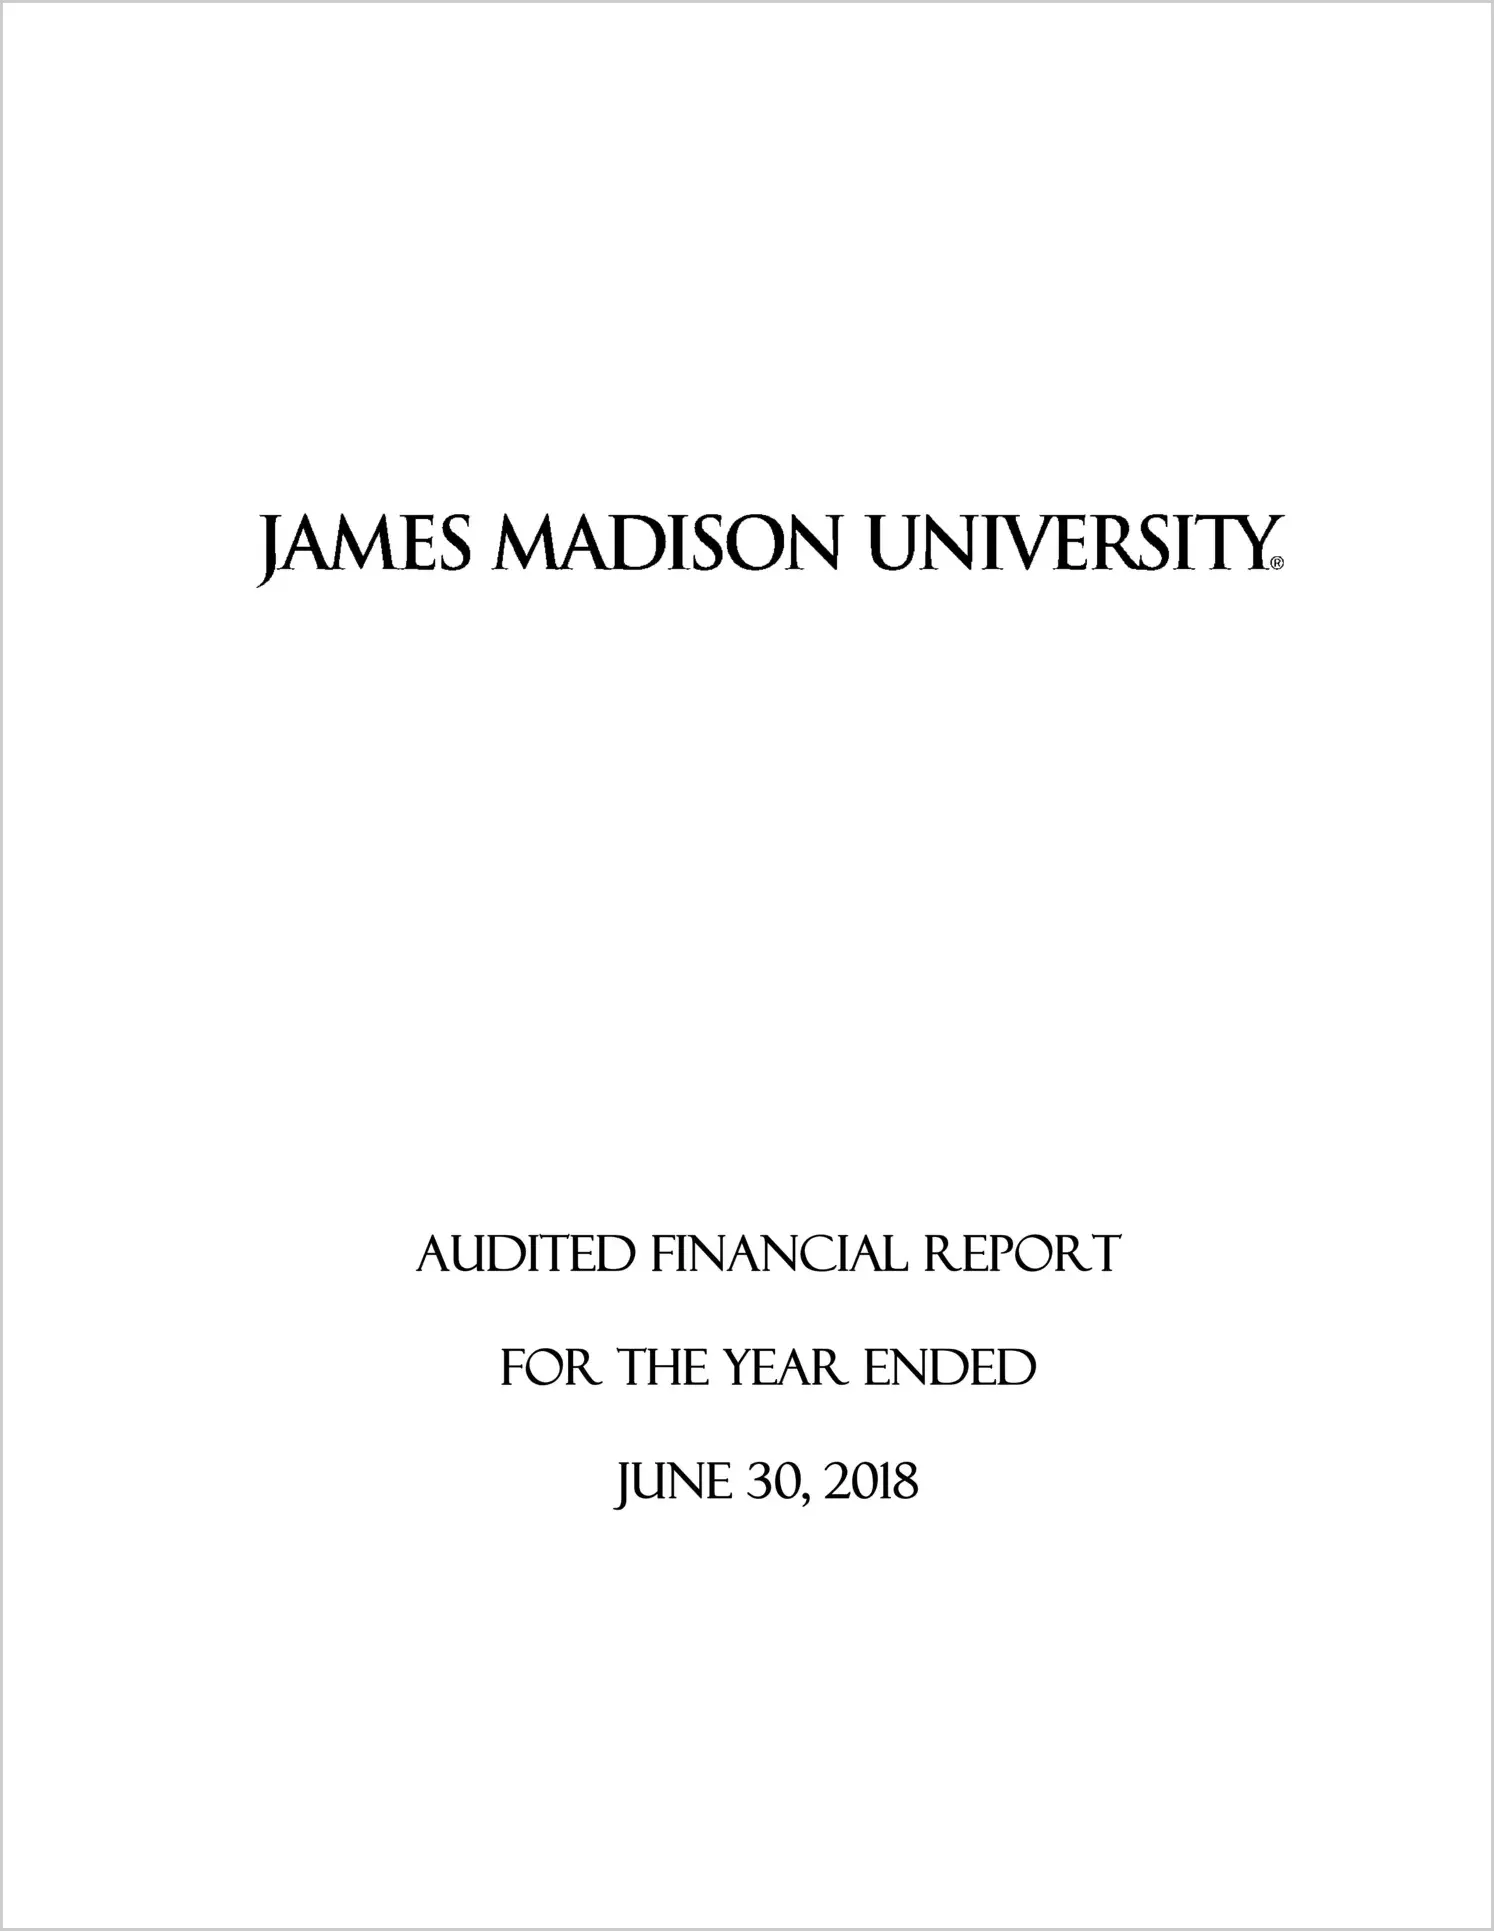 James Madison University Financial Statements for the year ended June 30, 2018